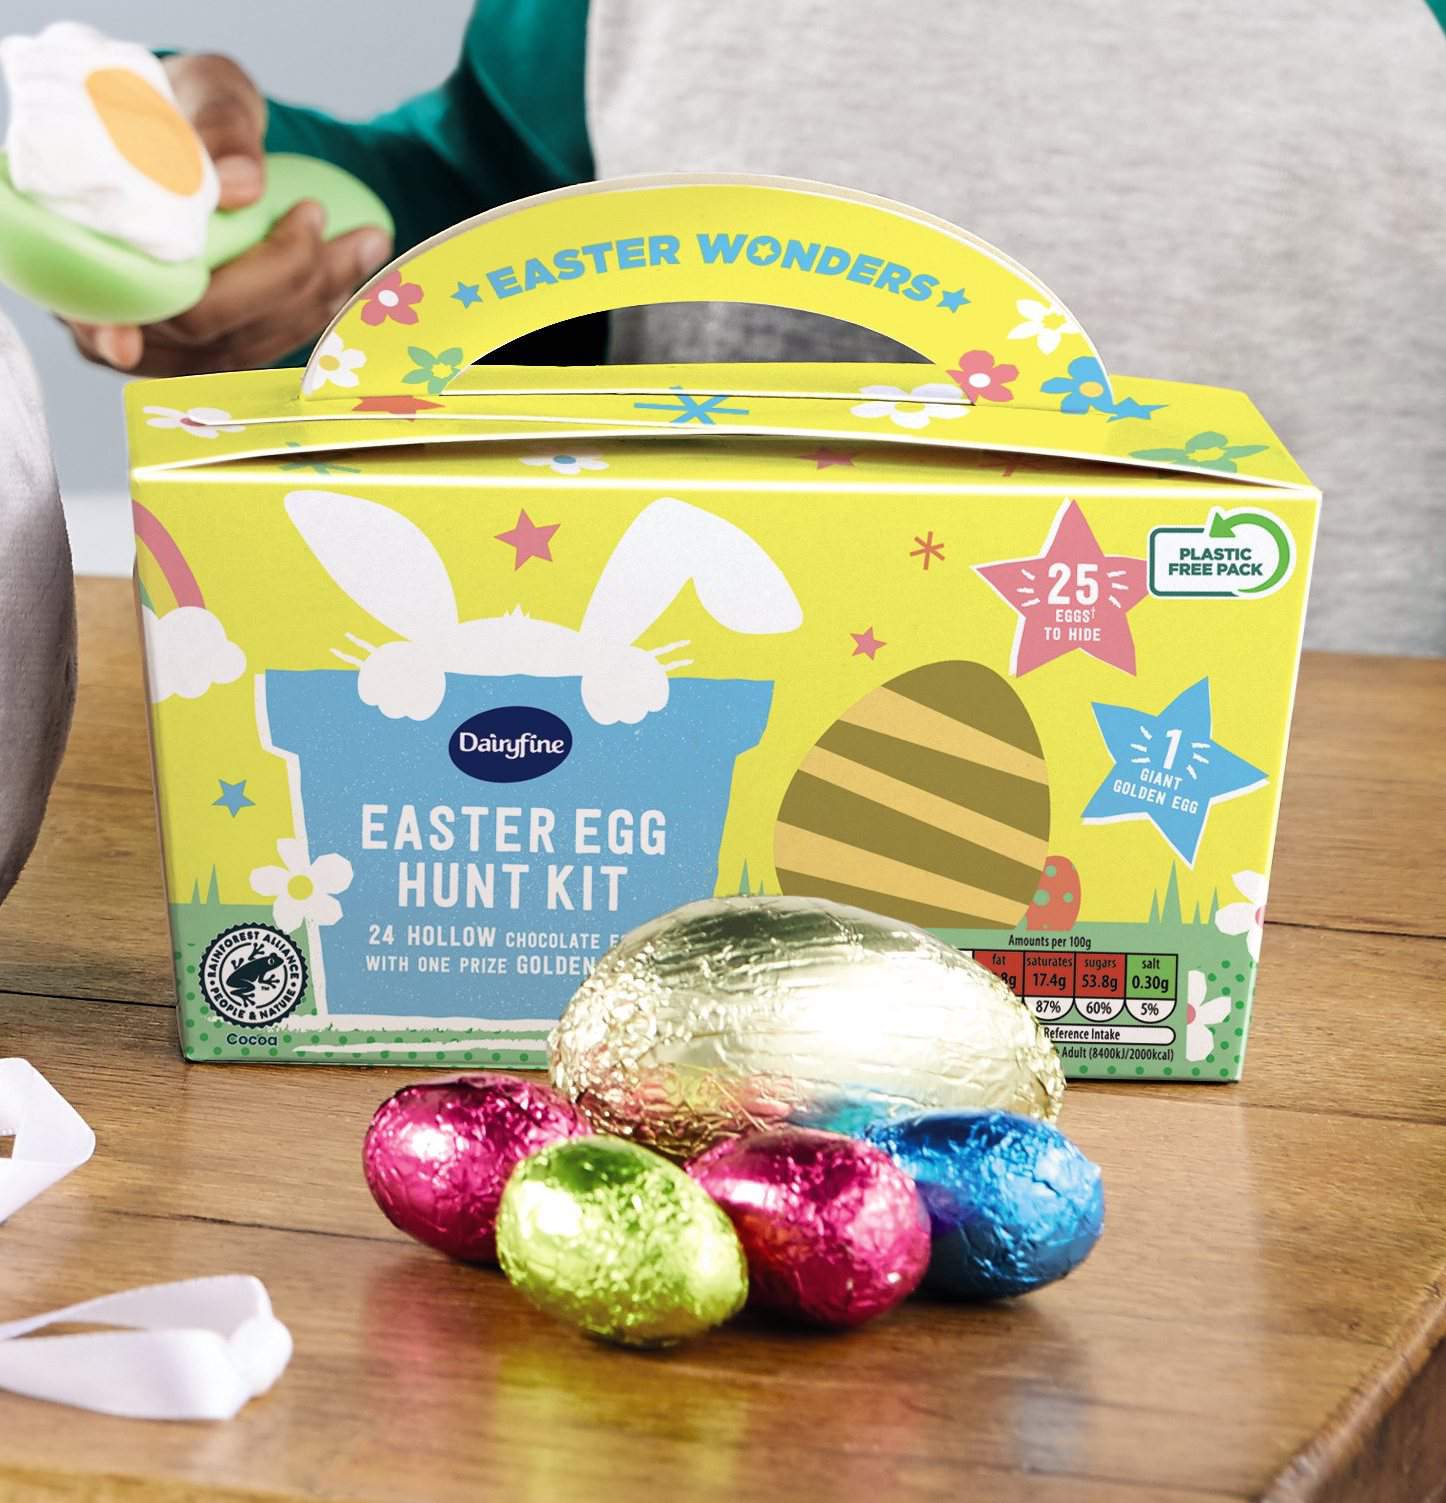 Aldi release list of delicious easter eggs with some available in store